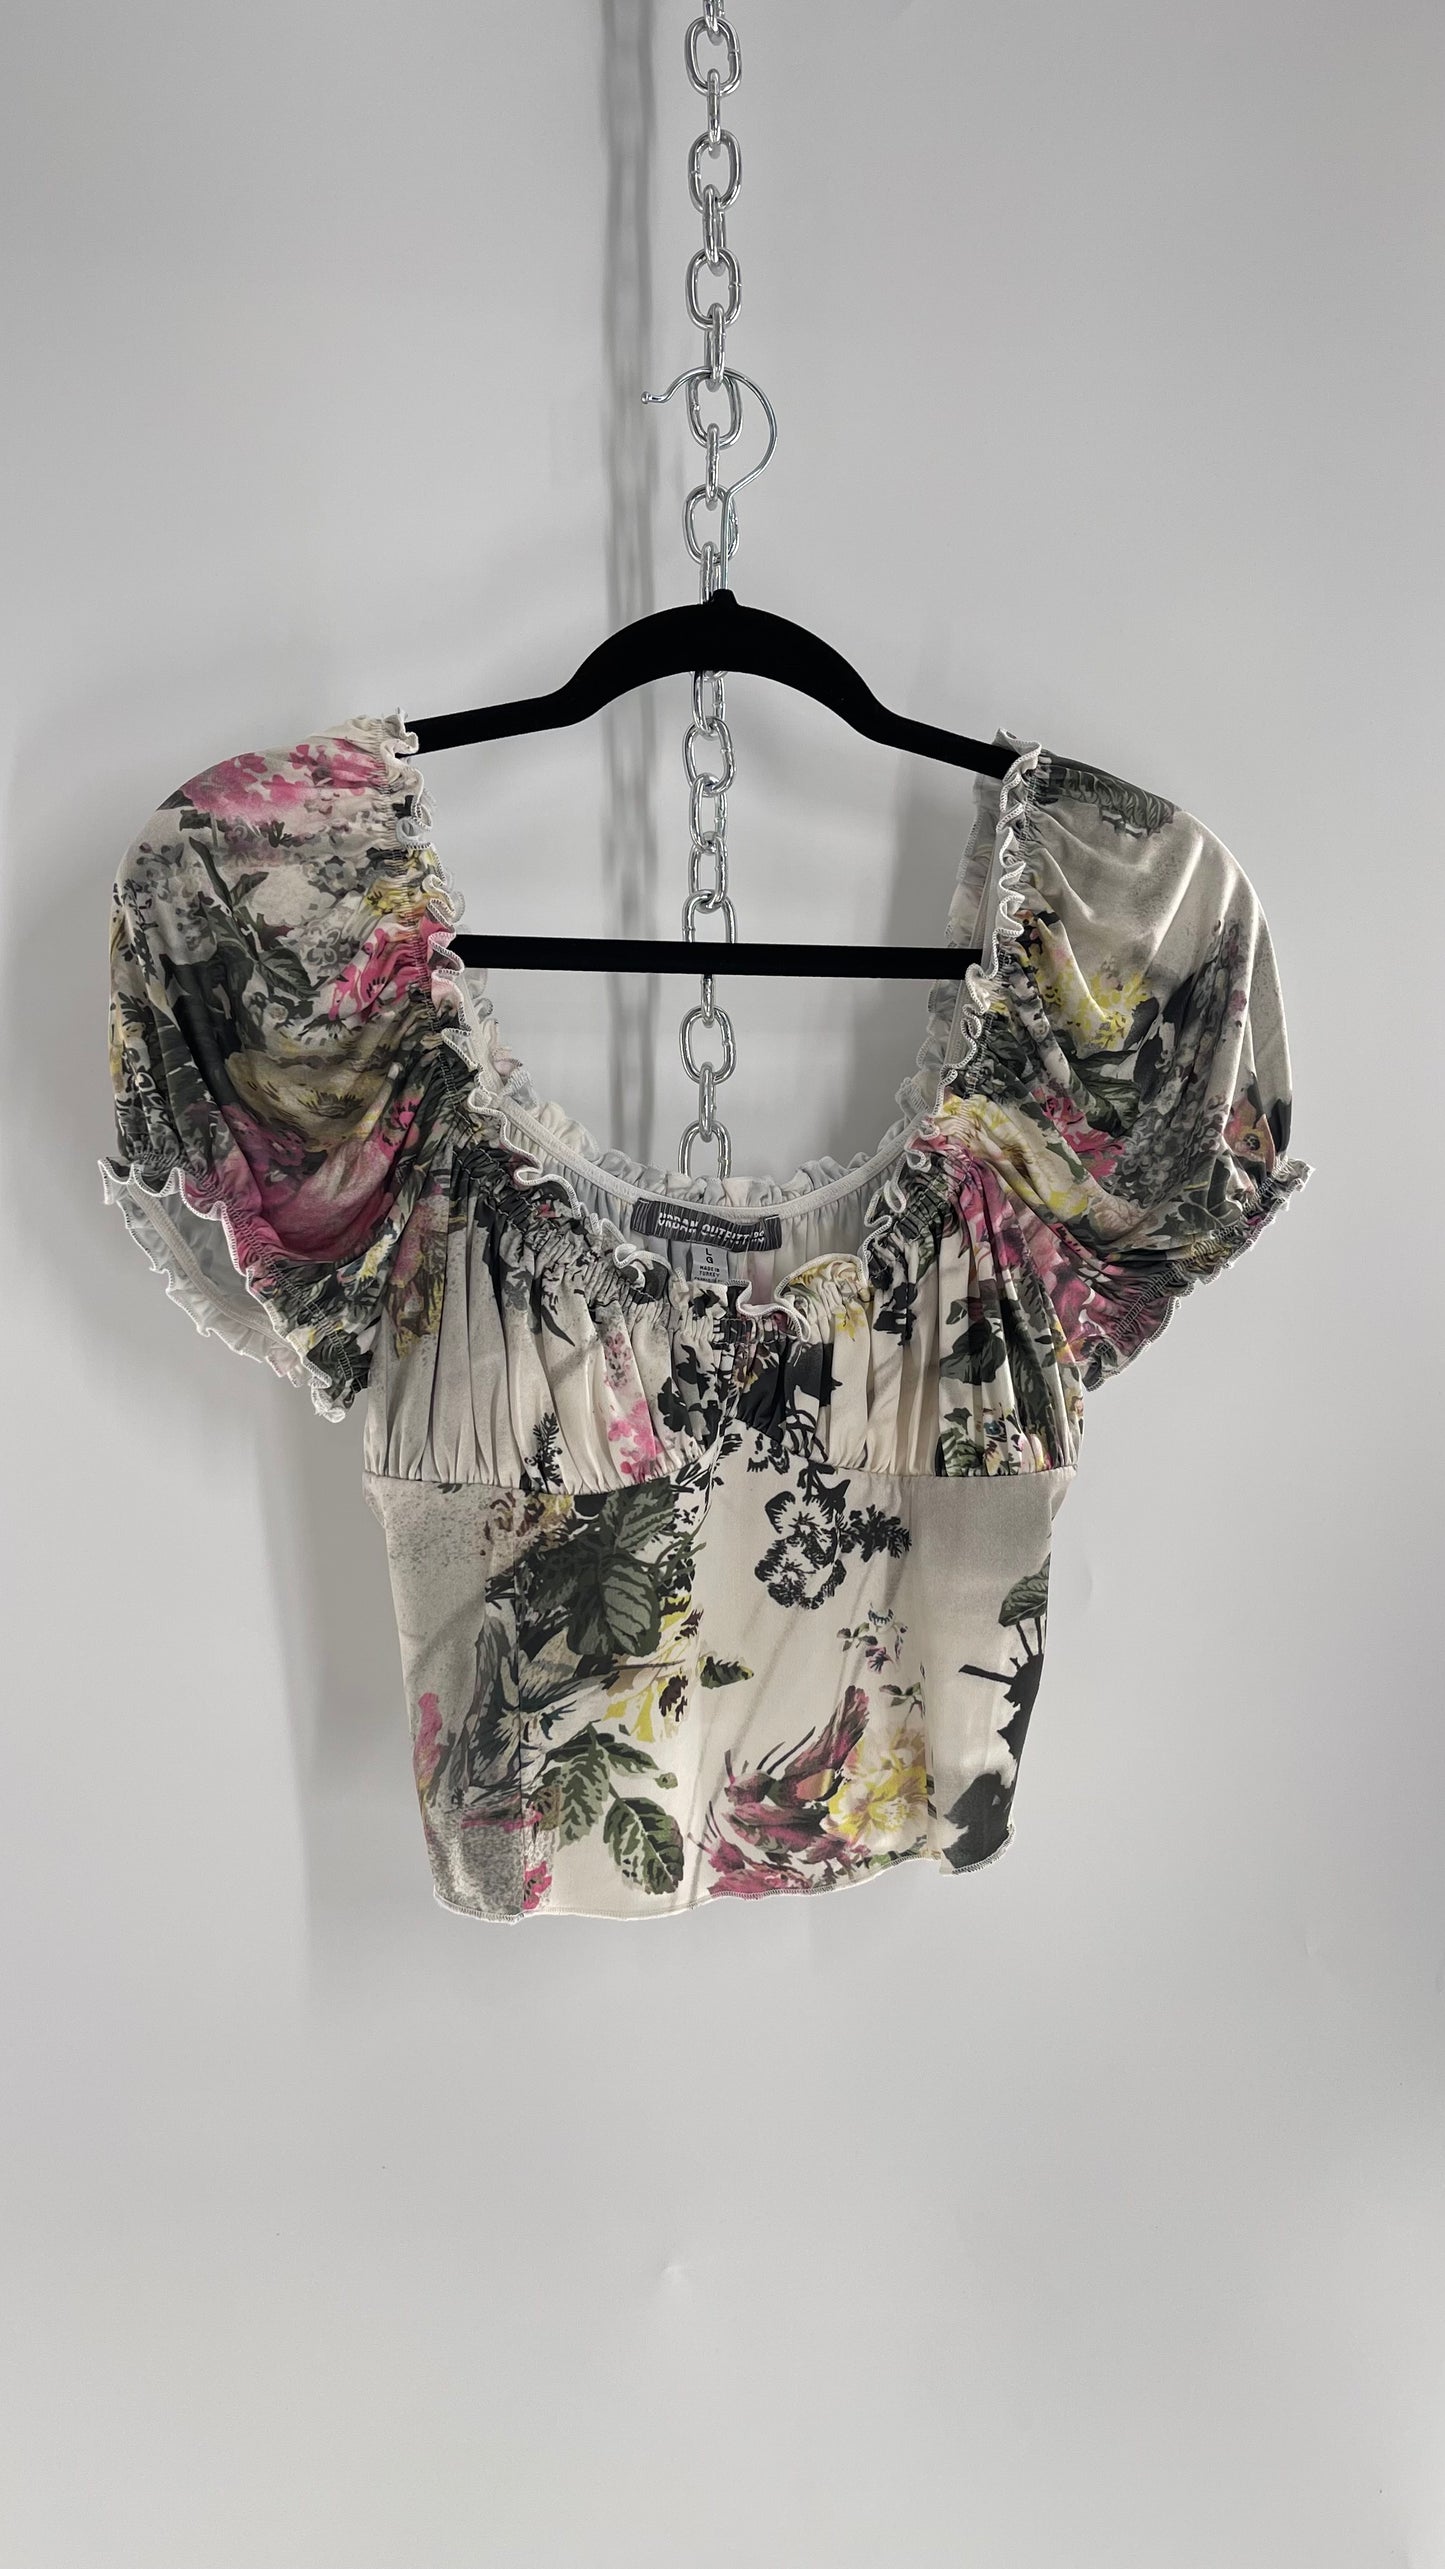 Urban Outfitters Slinky Vintage Inspired Graphic Florals and Milkmaid Style Top (Large)